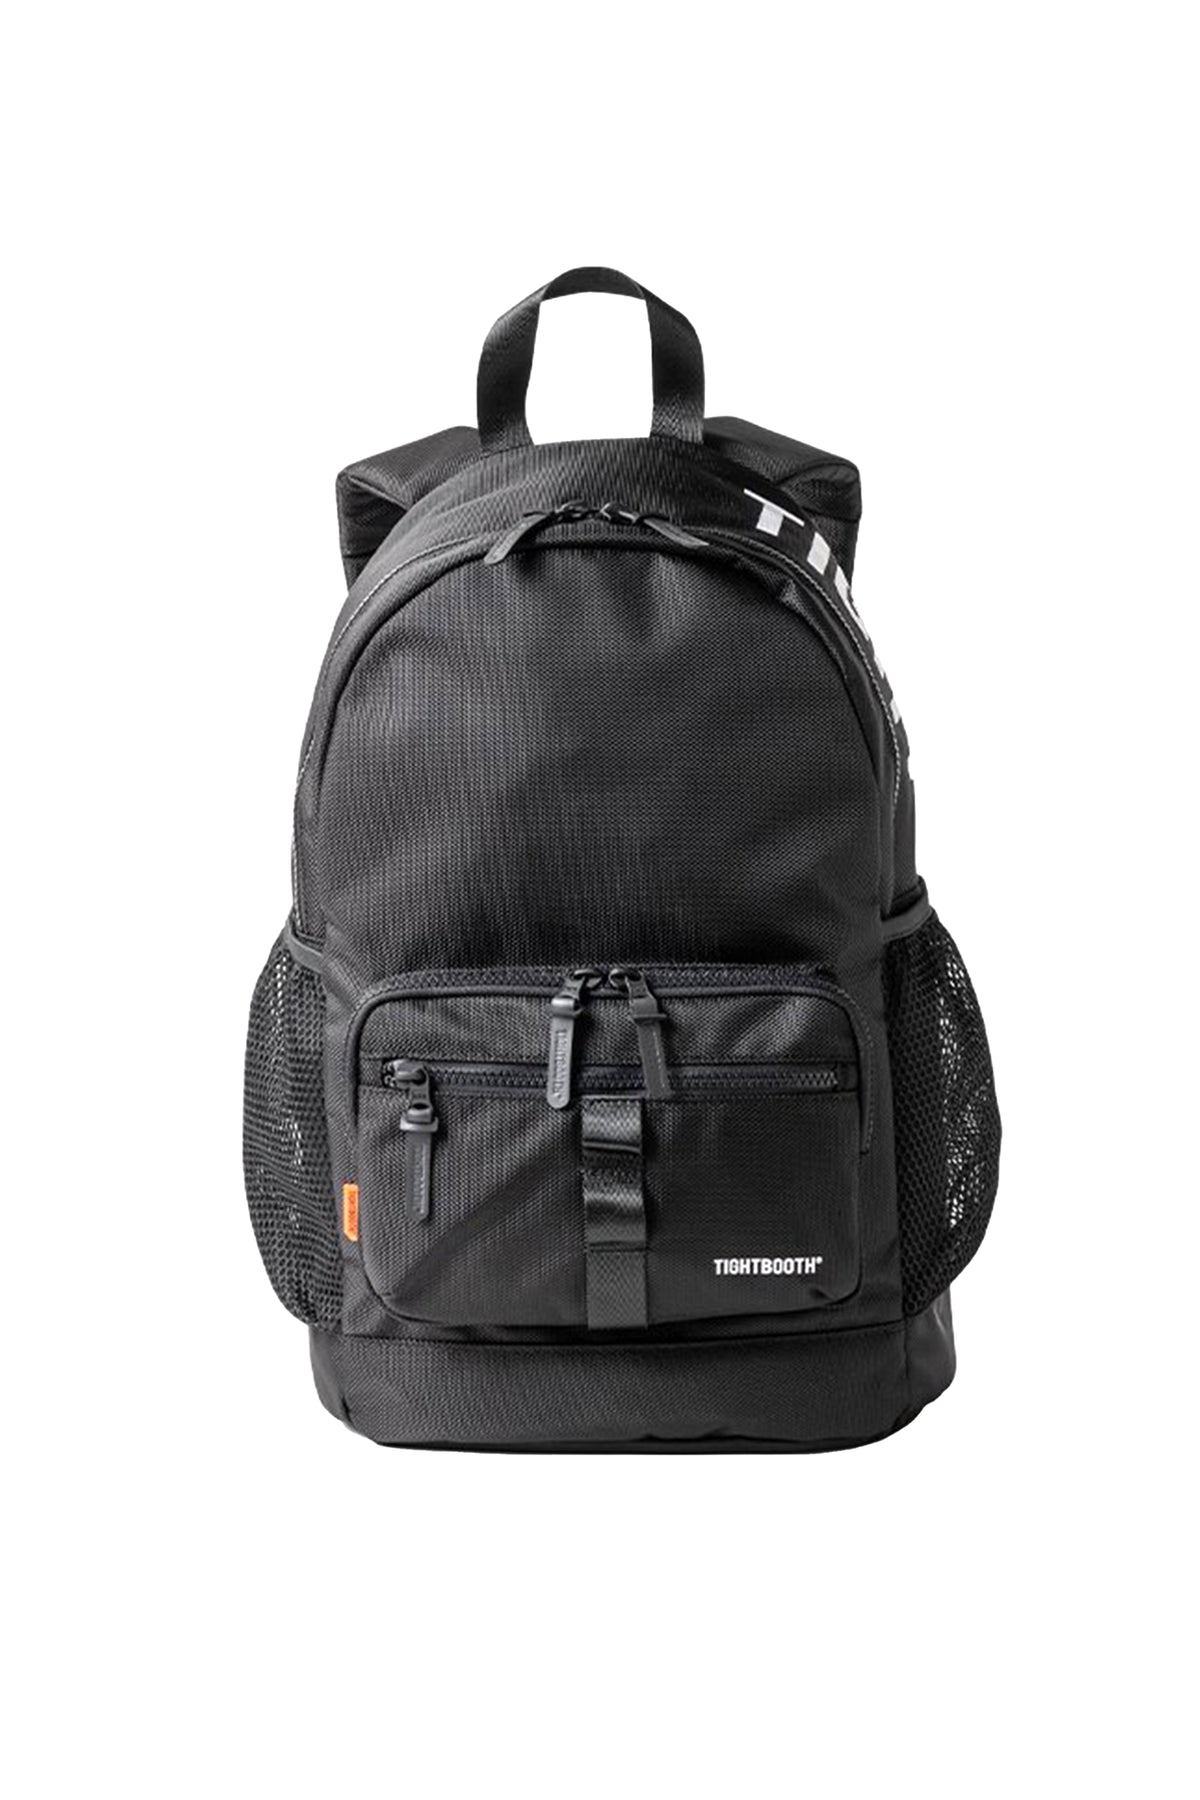 TIGHTBOOTH DAYPACK / BLK